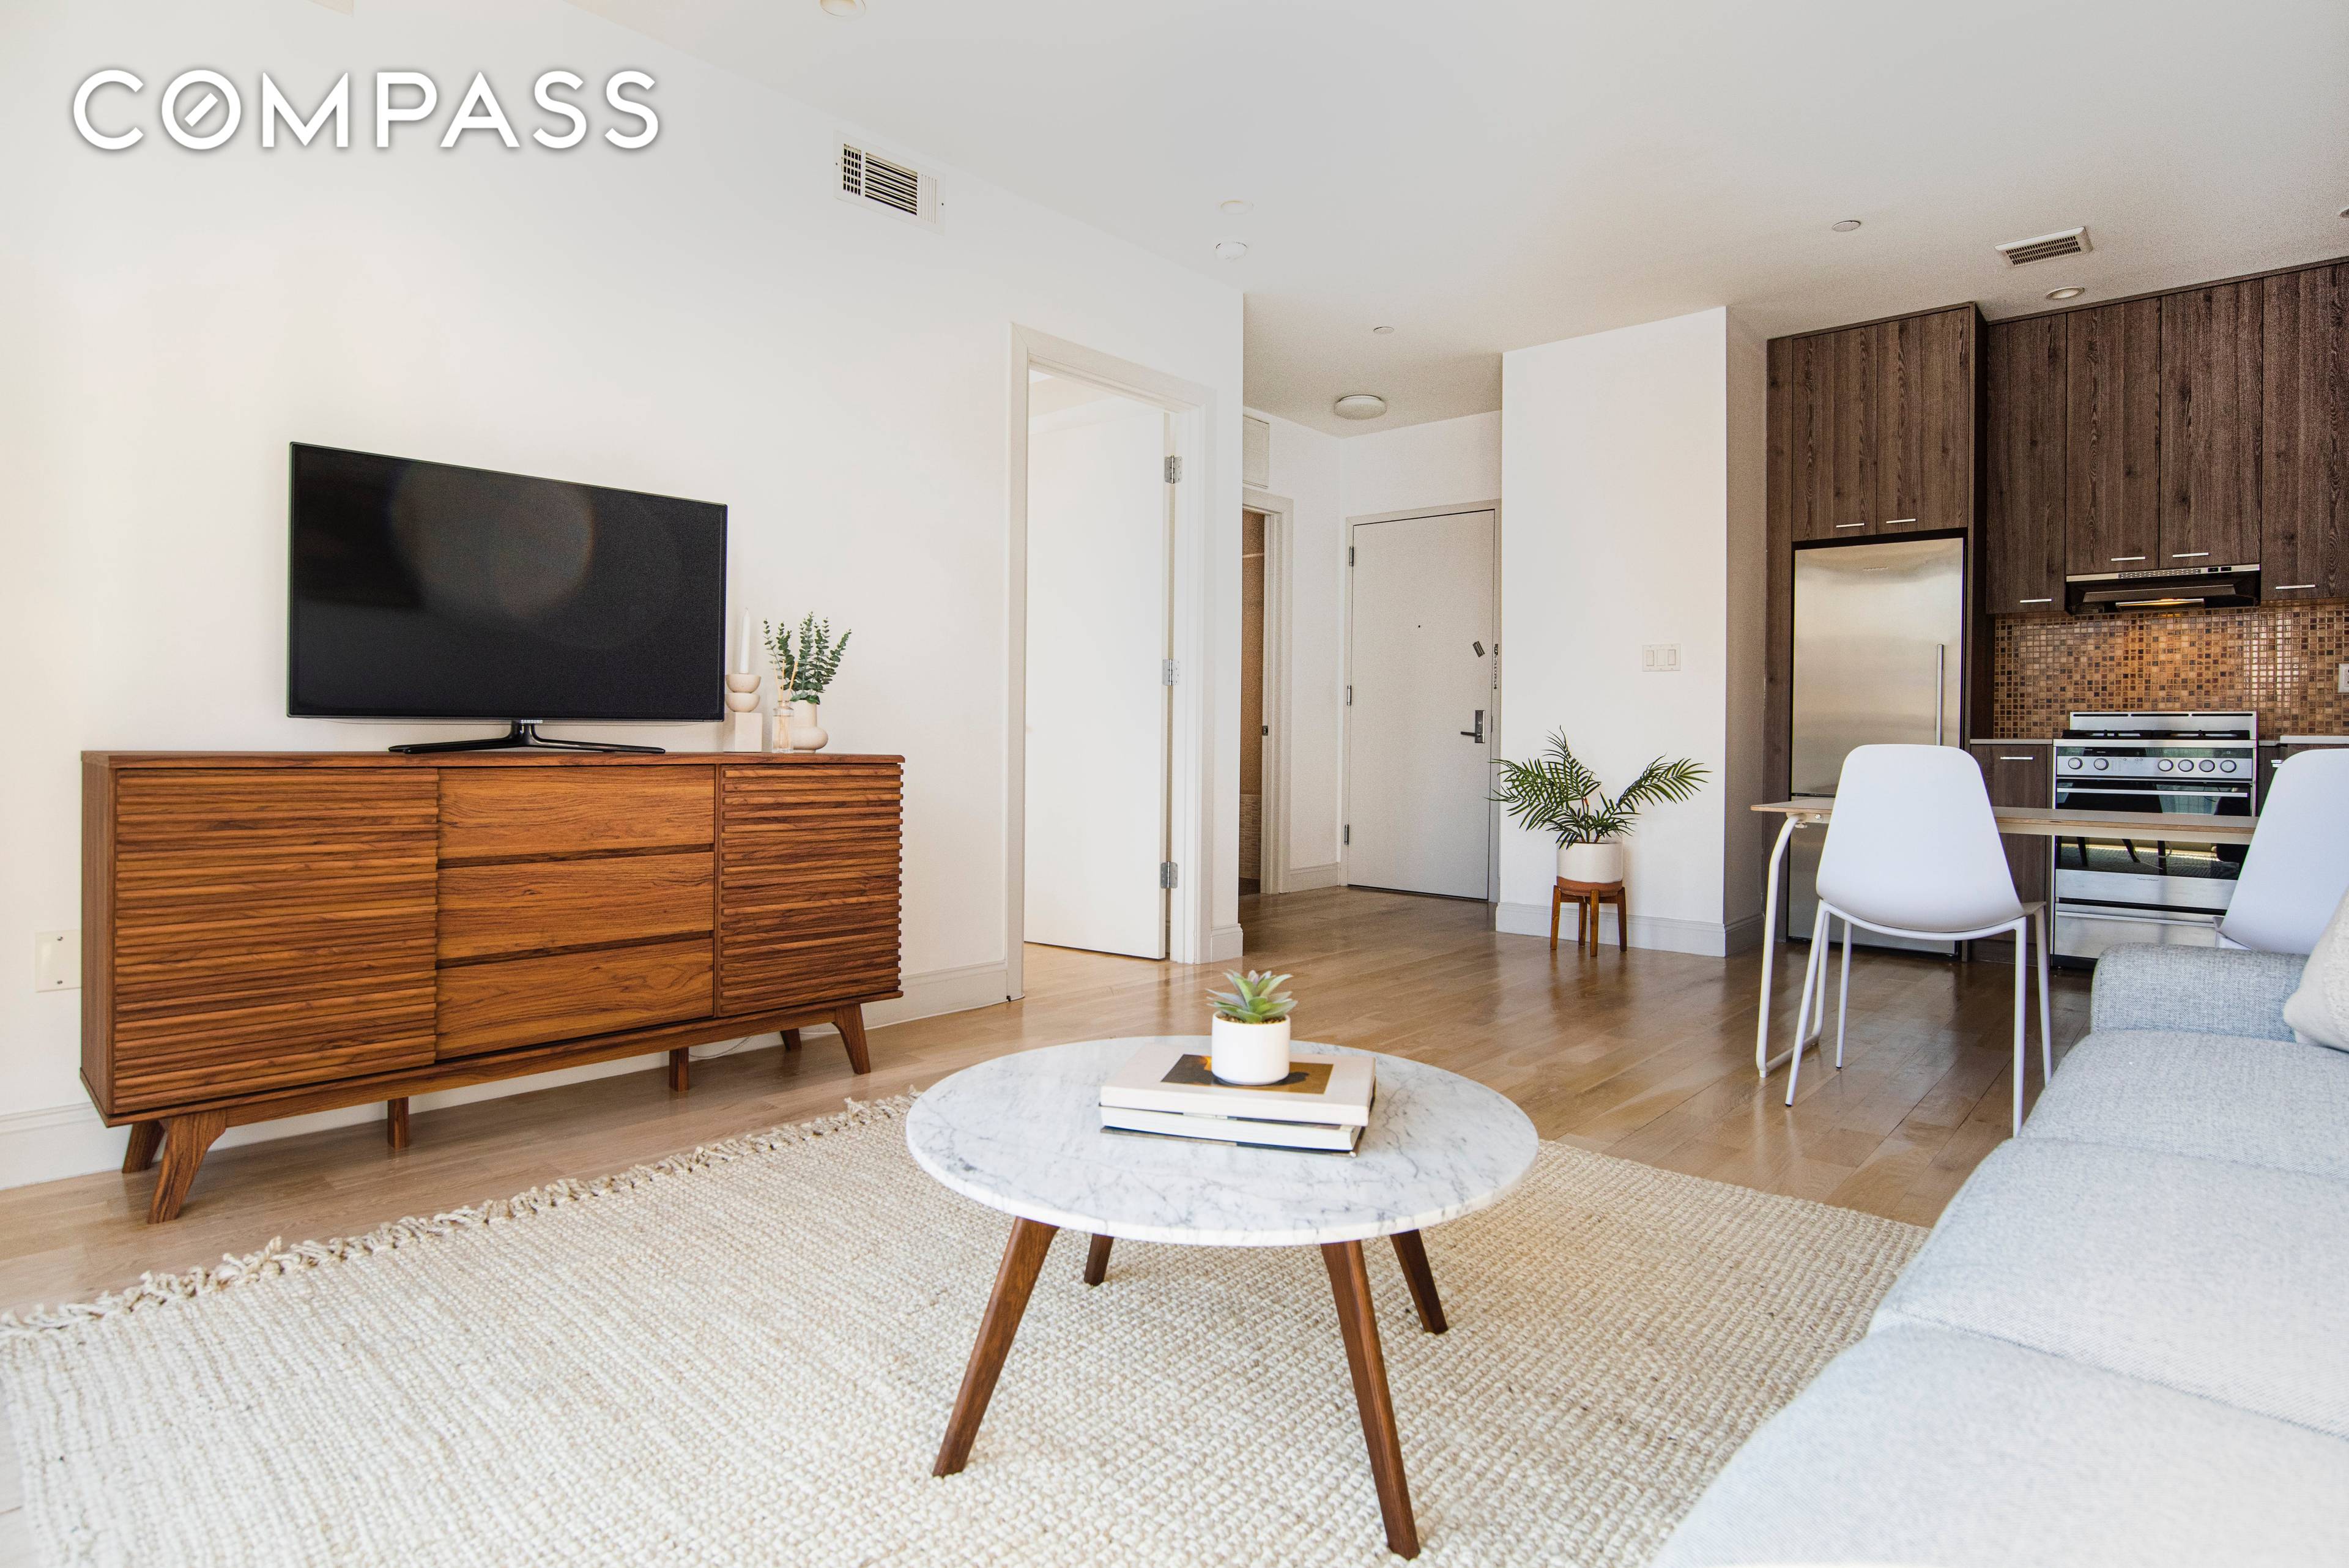 With a coveted location in the heart of Bed Stuy, this sleek and modern one bedroom, one bath boutique condominium occupies the top floor of one of the neighborhood s ...